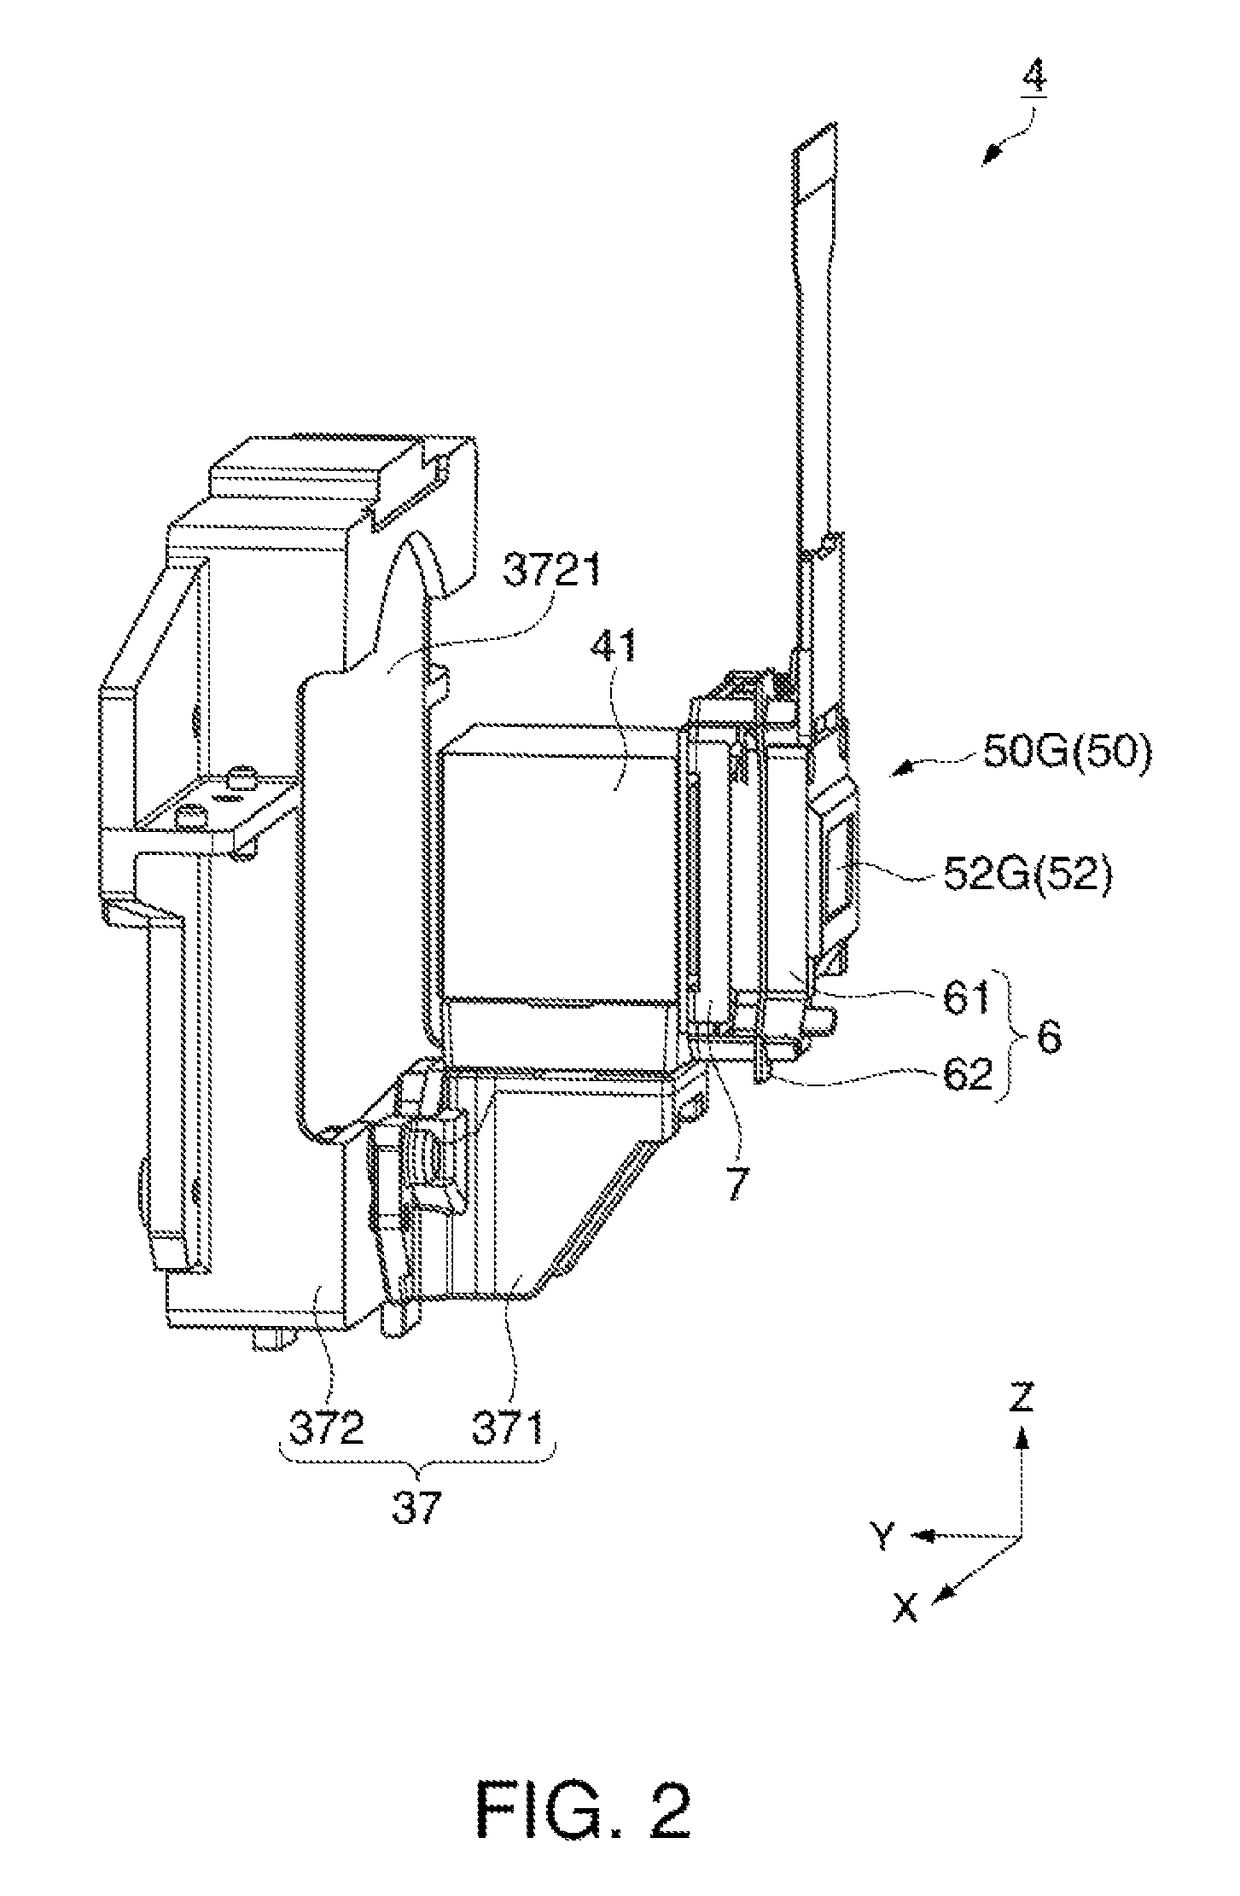 Projector having holding unit for light modulating device and supporting member for the holding unit